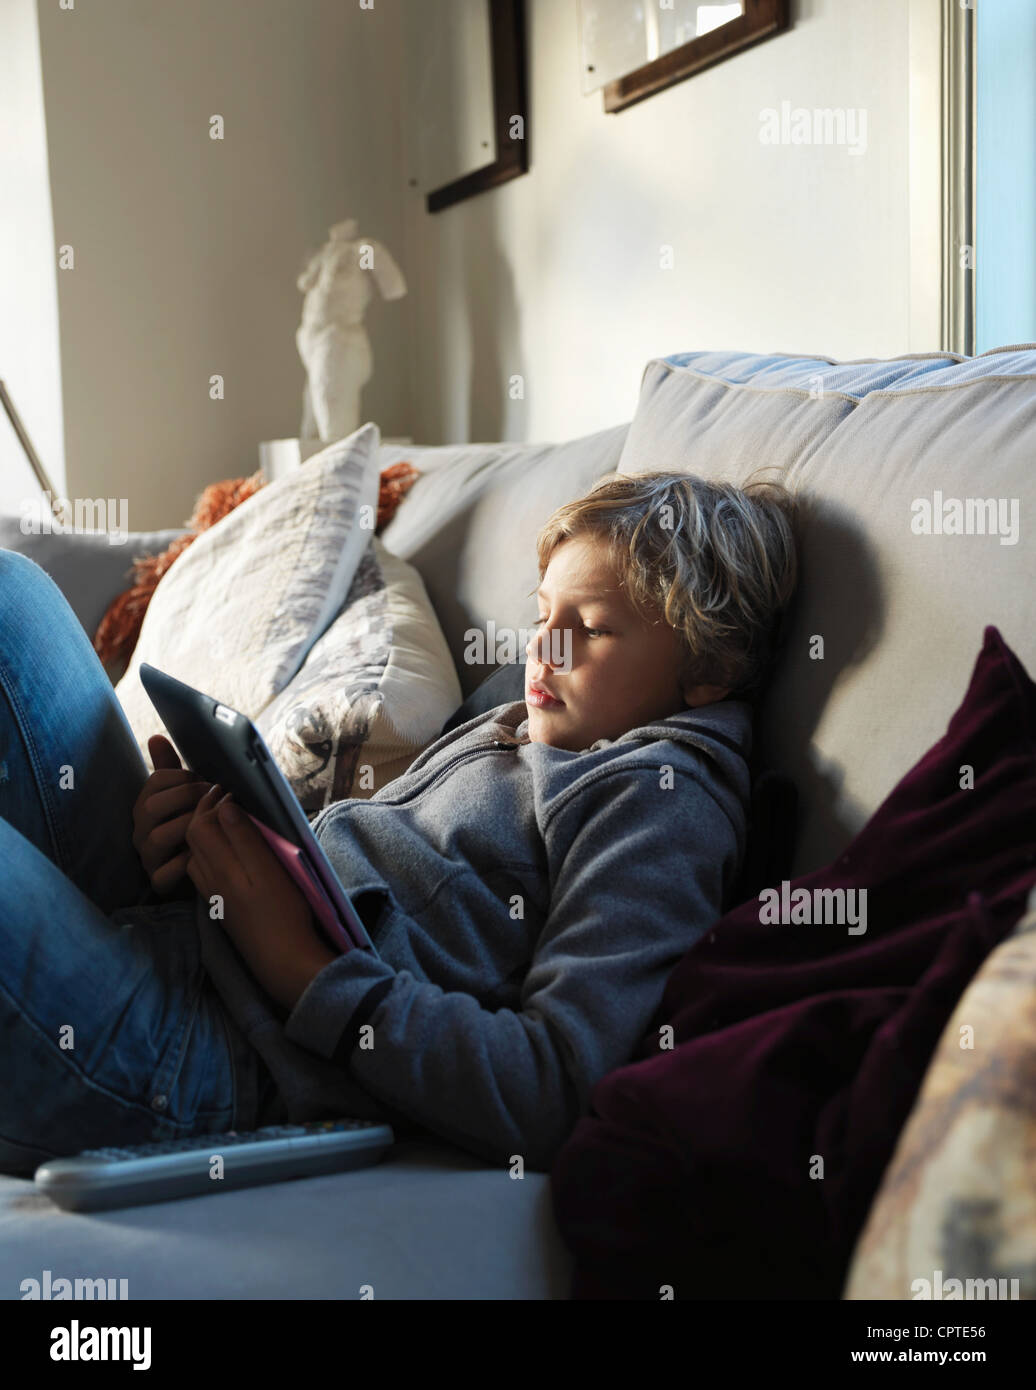 Teenage boy relaxing on sofa and using digital tablet Stock Photo